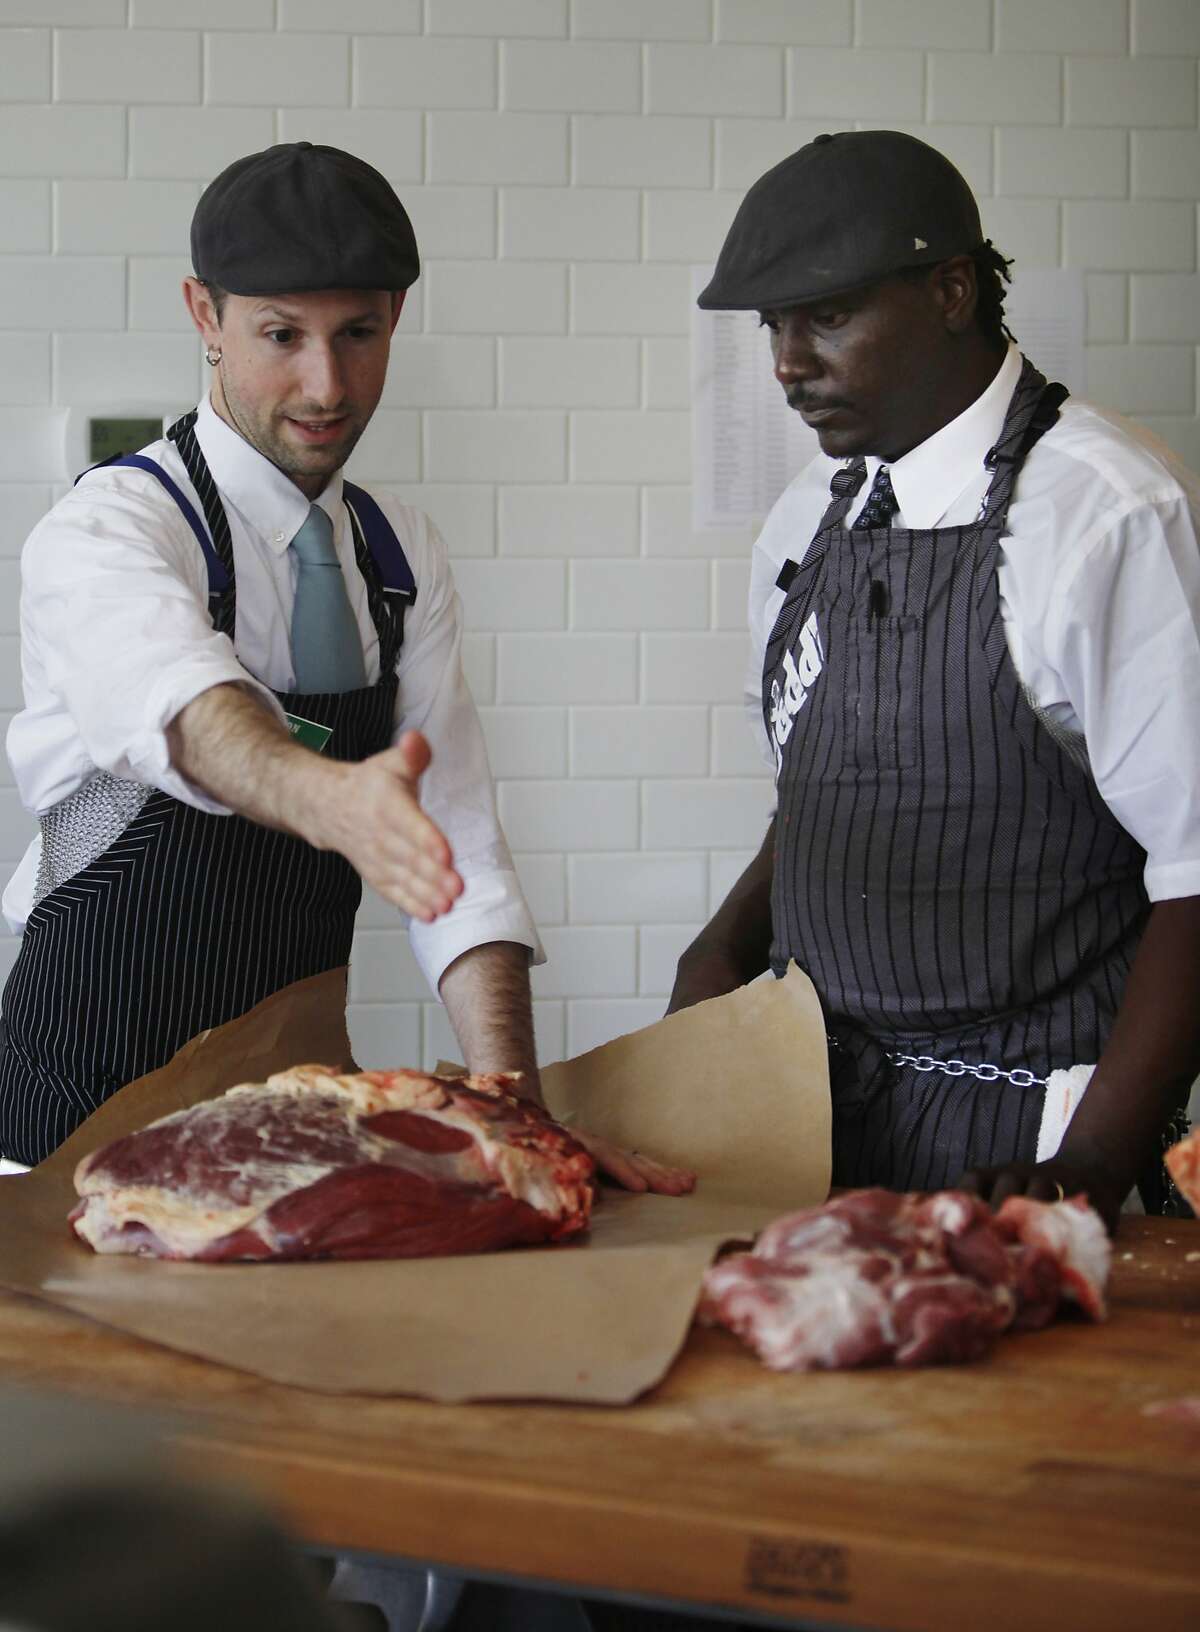 Aaron Rocchino (l to r), co-owner The Local Butcher Shop gives some pointers on wrapping meat to City College of San Francisco student Norman Nesby Jr. as Nesby Jr. works at his internship at The Local Butcher Shop on Thursday, February 20, 2014 in Berkeley, Calif.